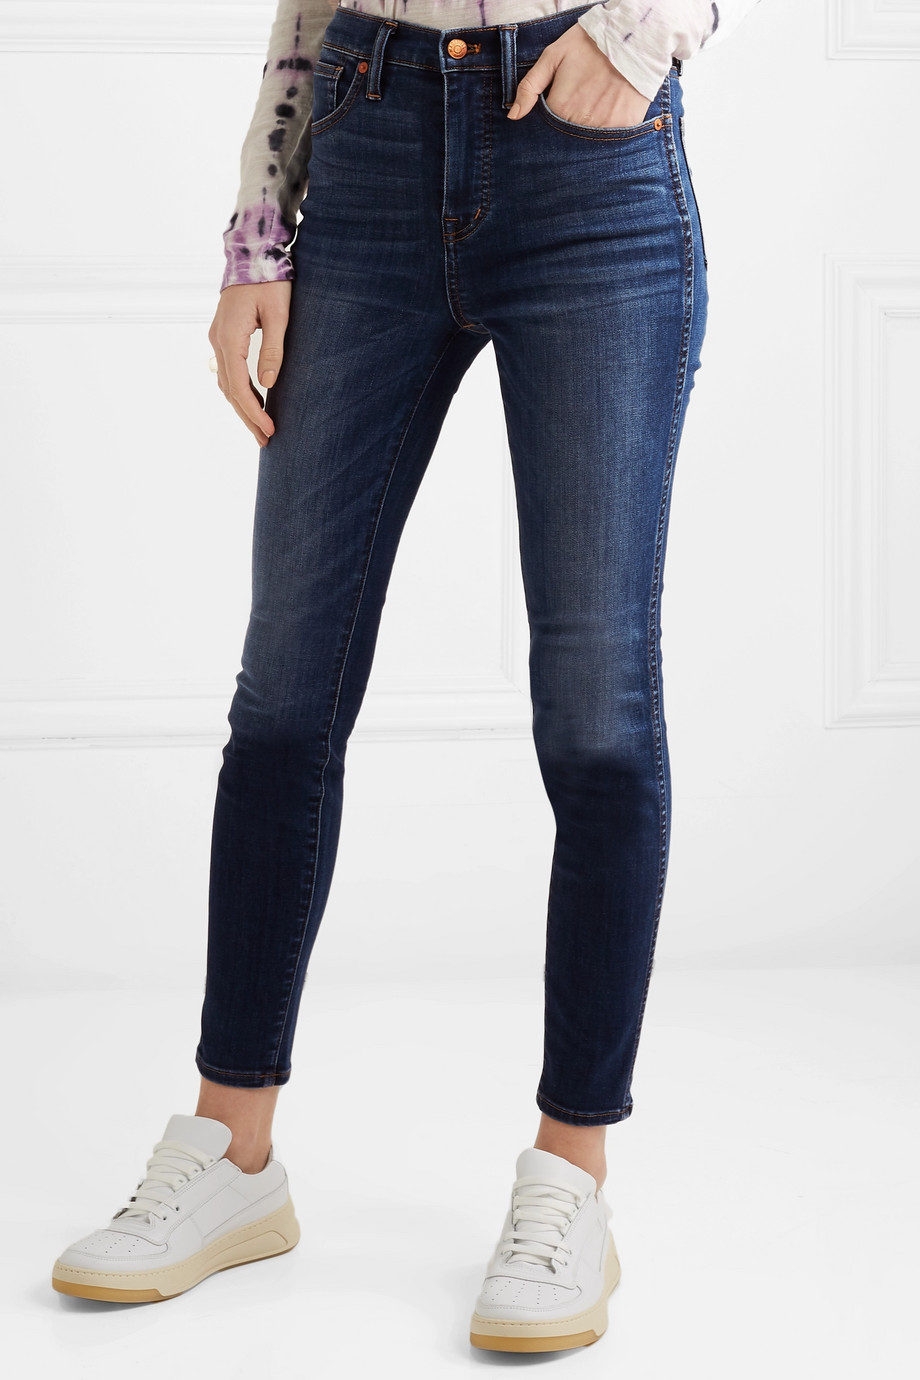 28 Jean-and-Shoe Pairings That Are So Affordable | Who What Wear